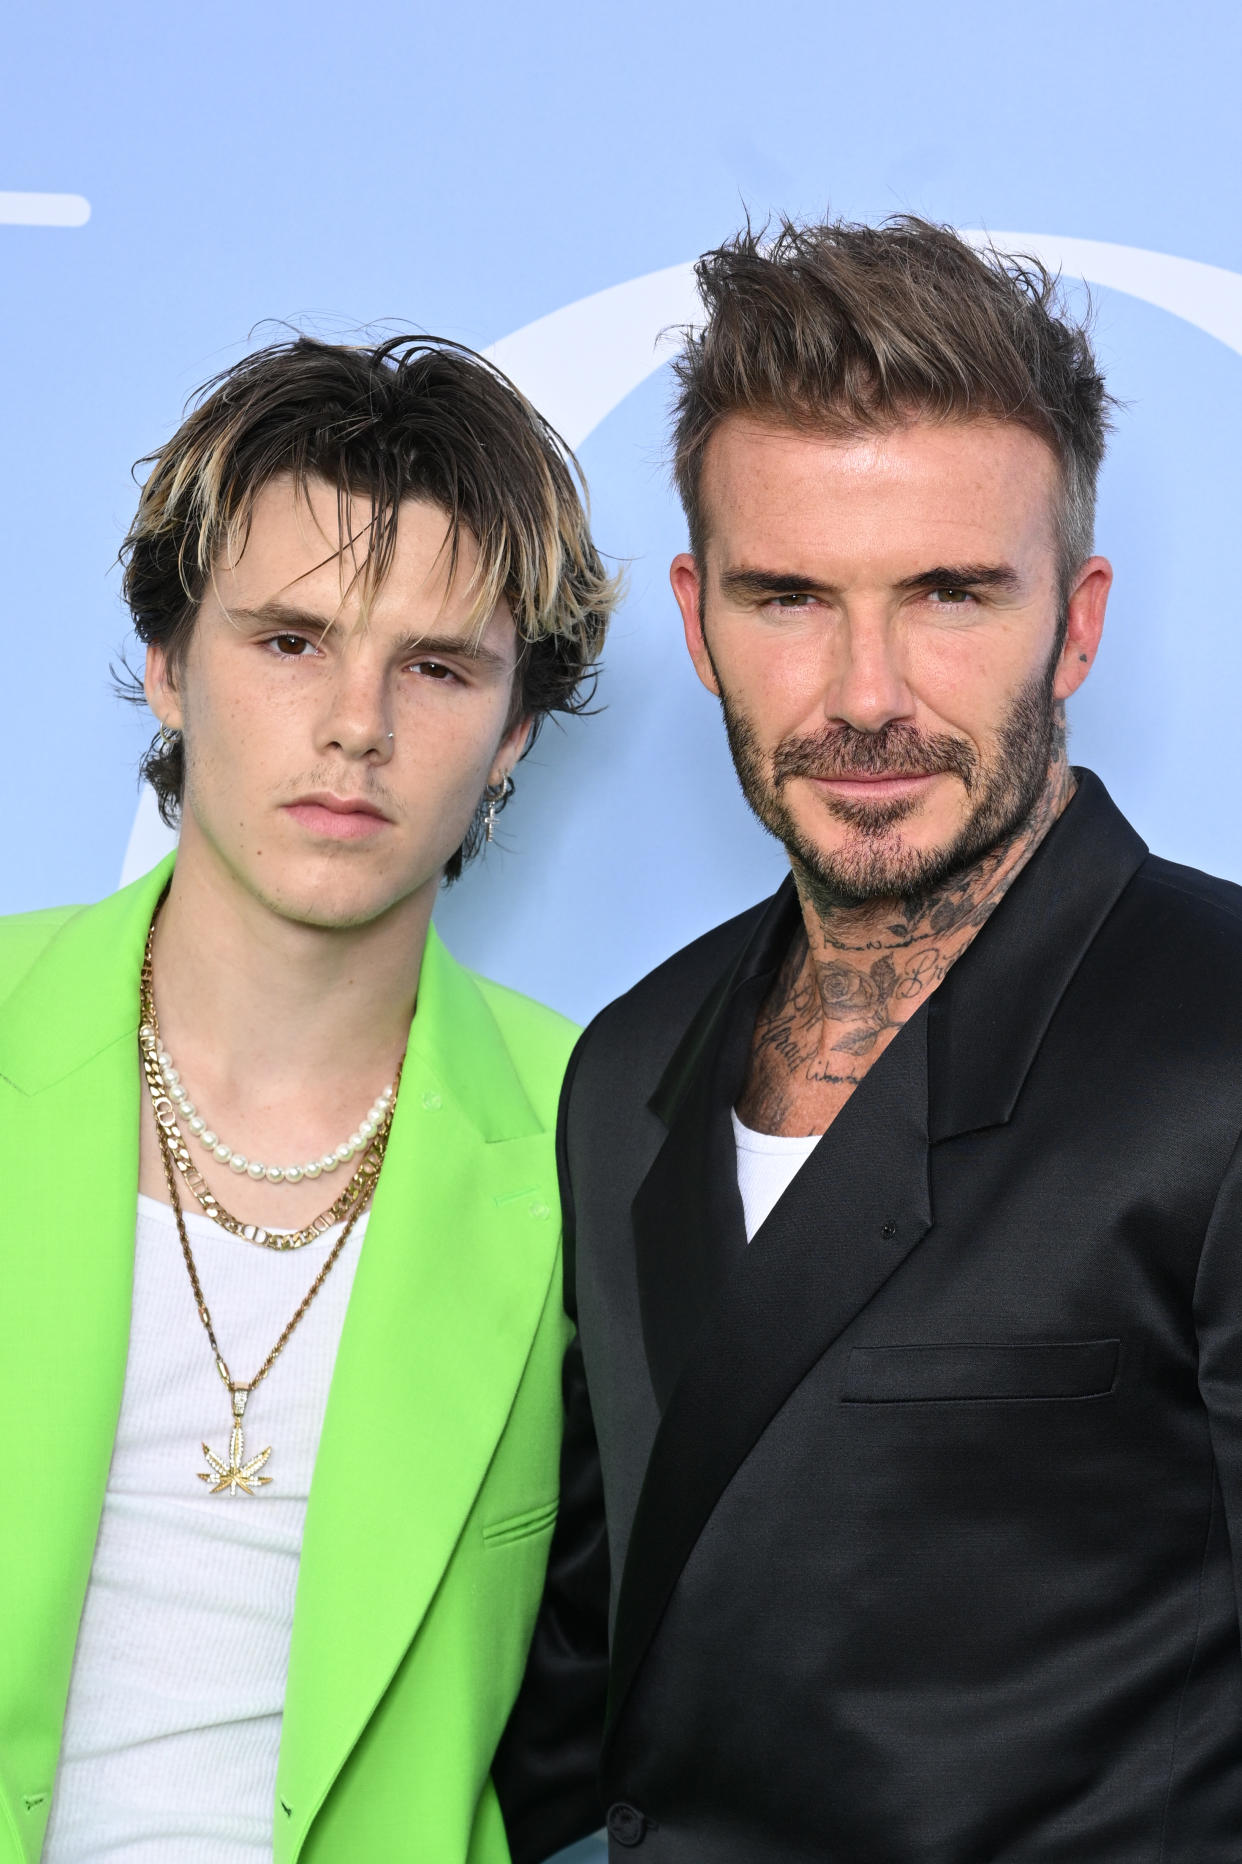 For Non-Editorial use please seek approval from Fashion House)  David Beckham (R) and son Cruz Beckham (L) attend the Dior Homme Menswear Spring Summer 2023 show as part of Paris Fashion Week  on June 24, 2022 in Paris, France. (Photo by Stephane Cardinale - Corbis/Corbis via Getty Images)